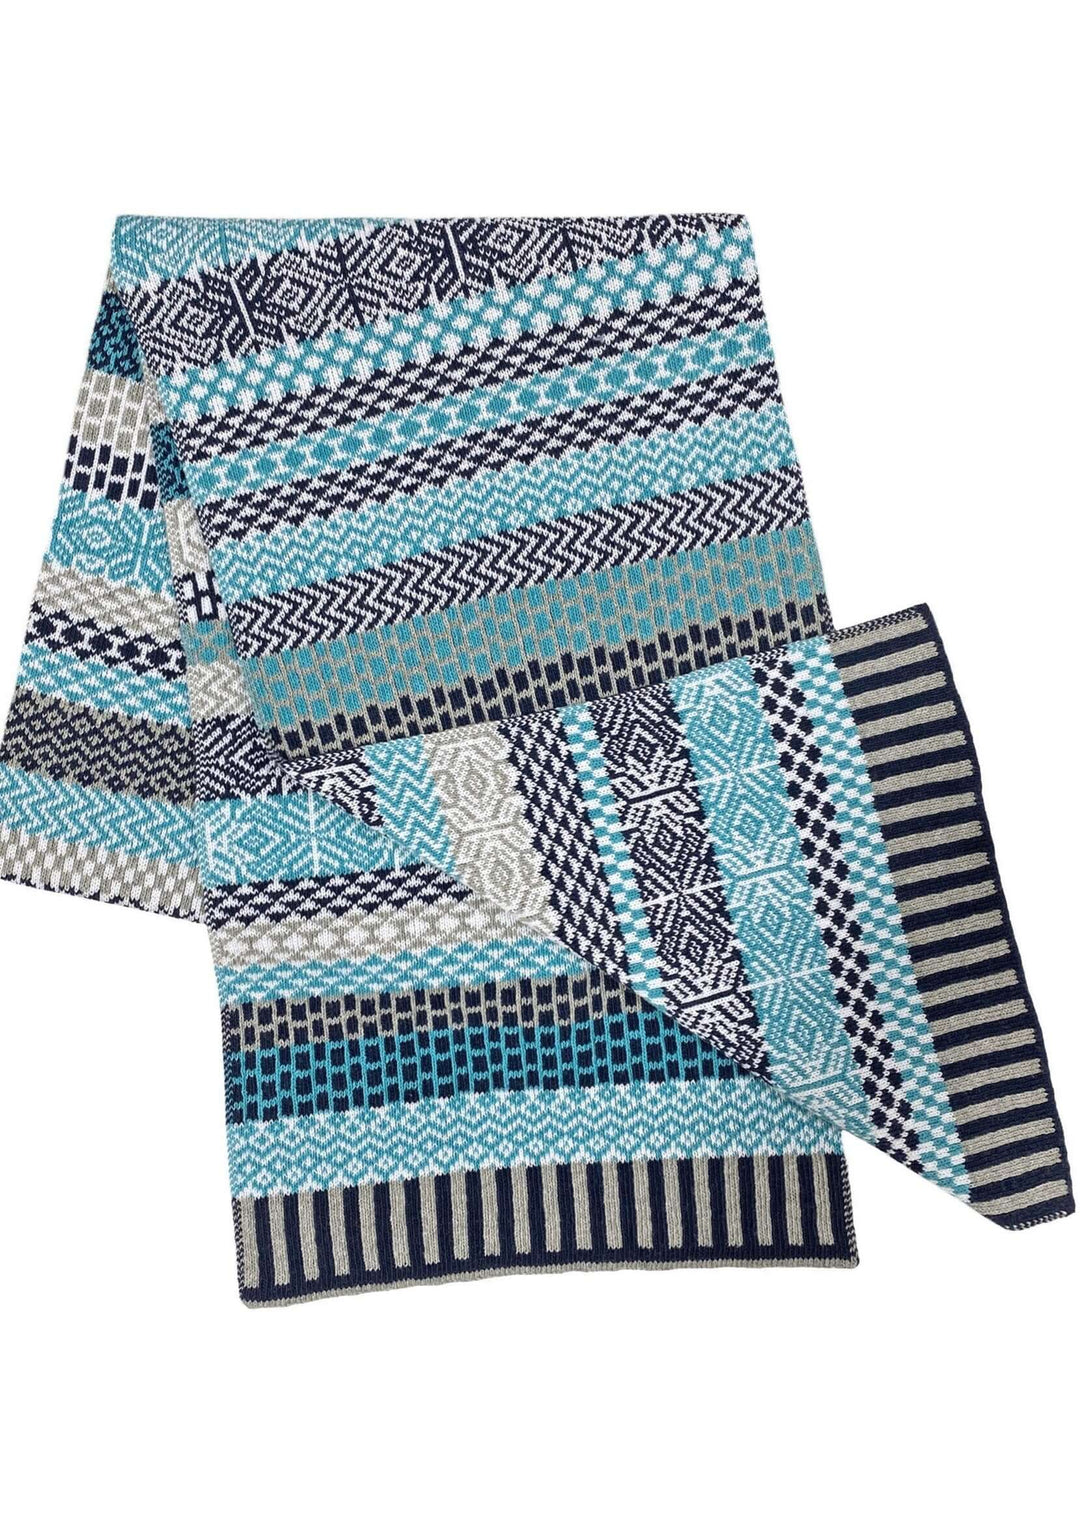 Solmate SNOWFALL  Knitted Scarf with Colors Turquoise, Navy, Gray & White | Made in USA | Classy Cozy Cool Women's Made in America Clothing Boutique